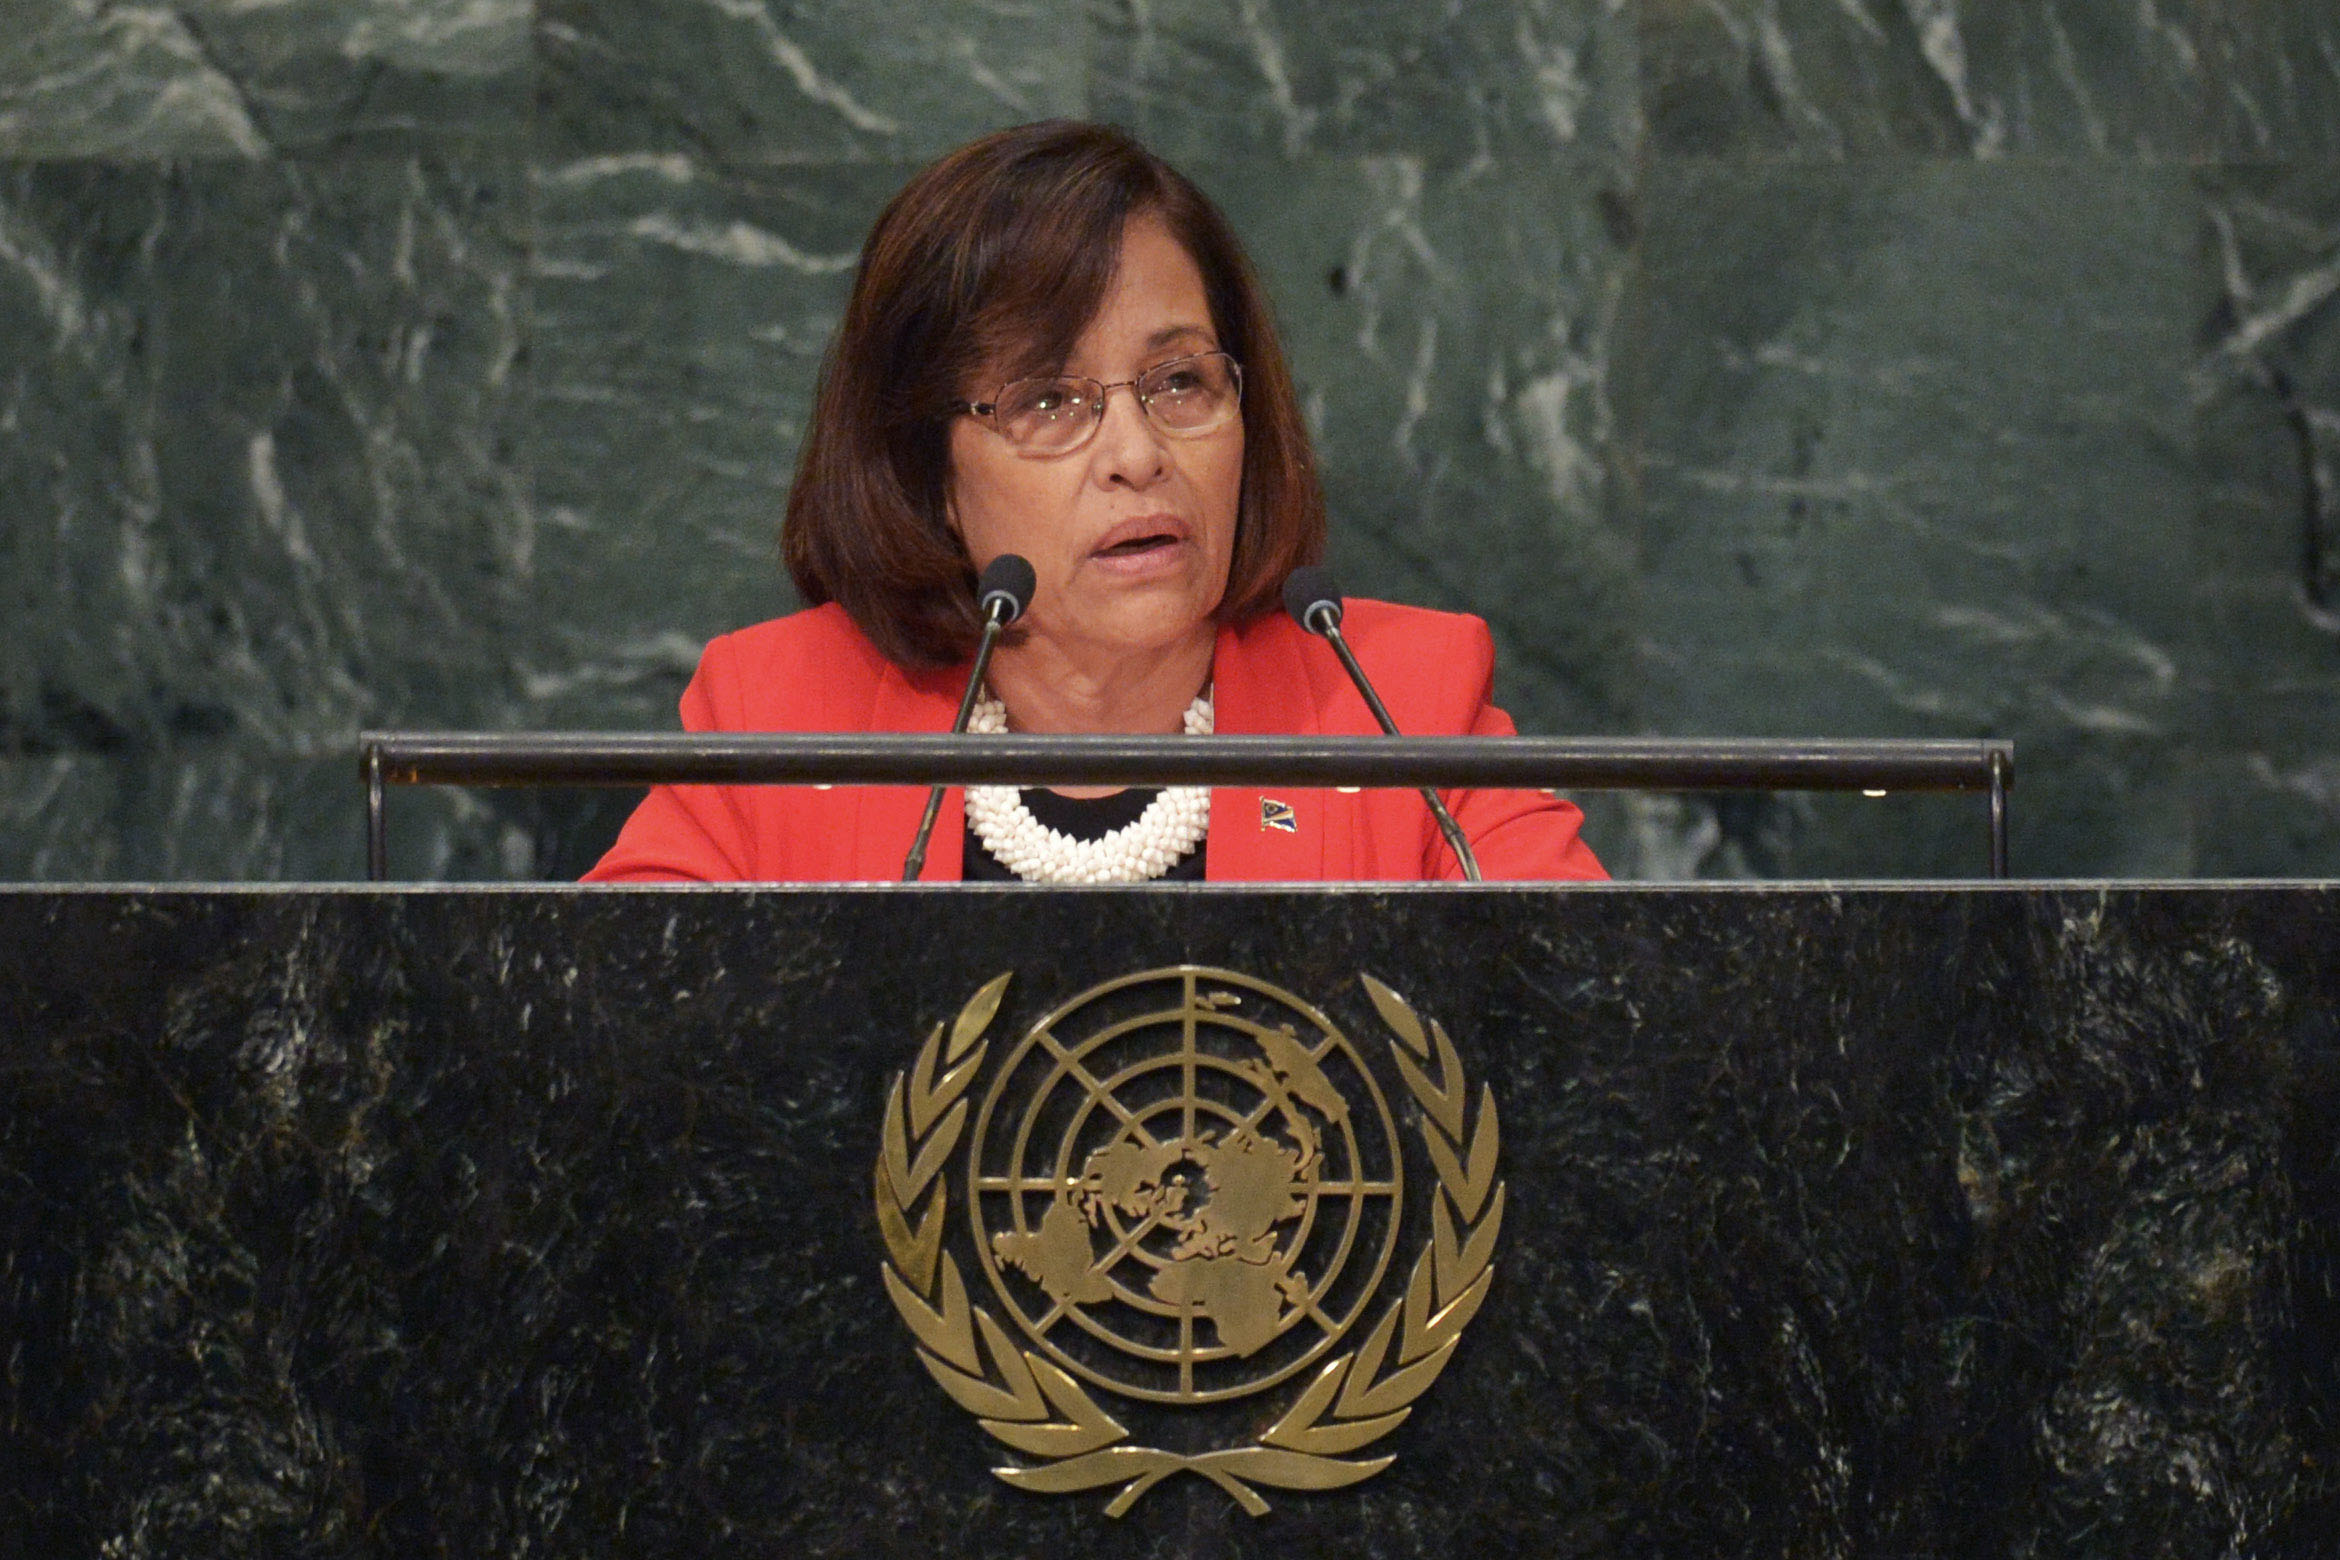 PHOTO: Hilda Heine, President of the Marshall Islands, addresses the 71st session of the United Nations General Assembly at the UN headquarters in New York, Sept. 22, 2016.